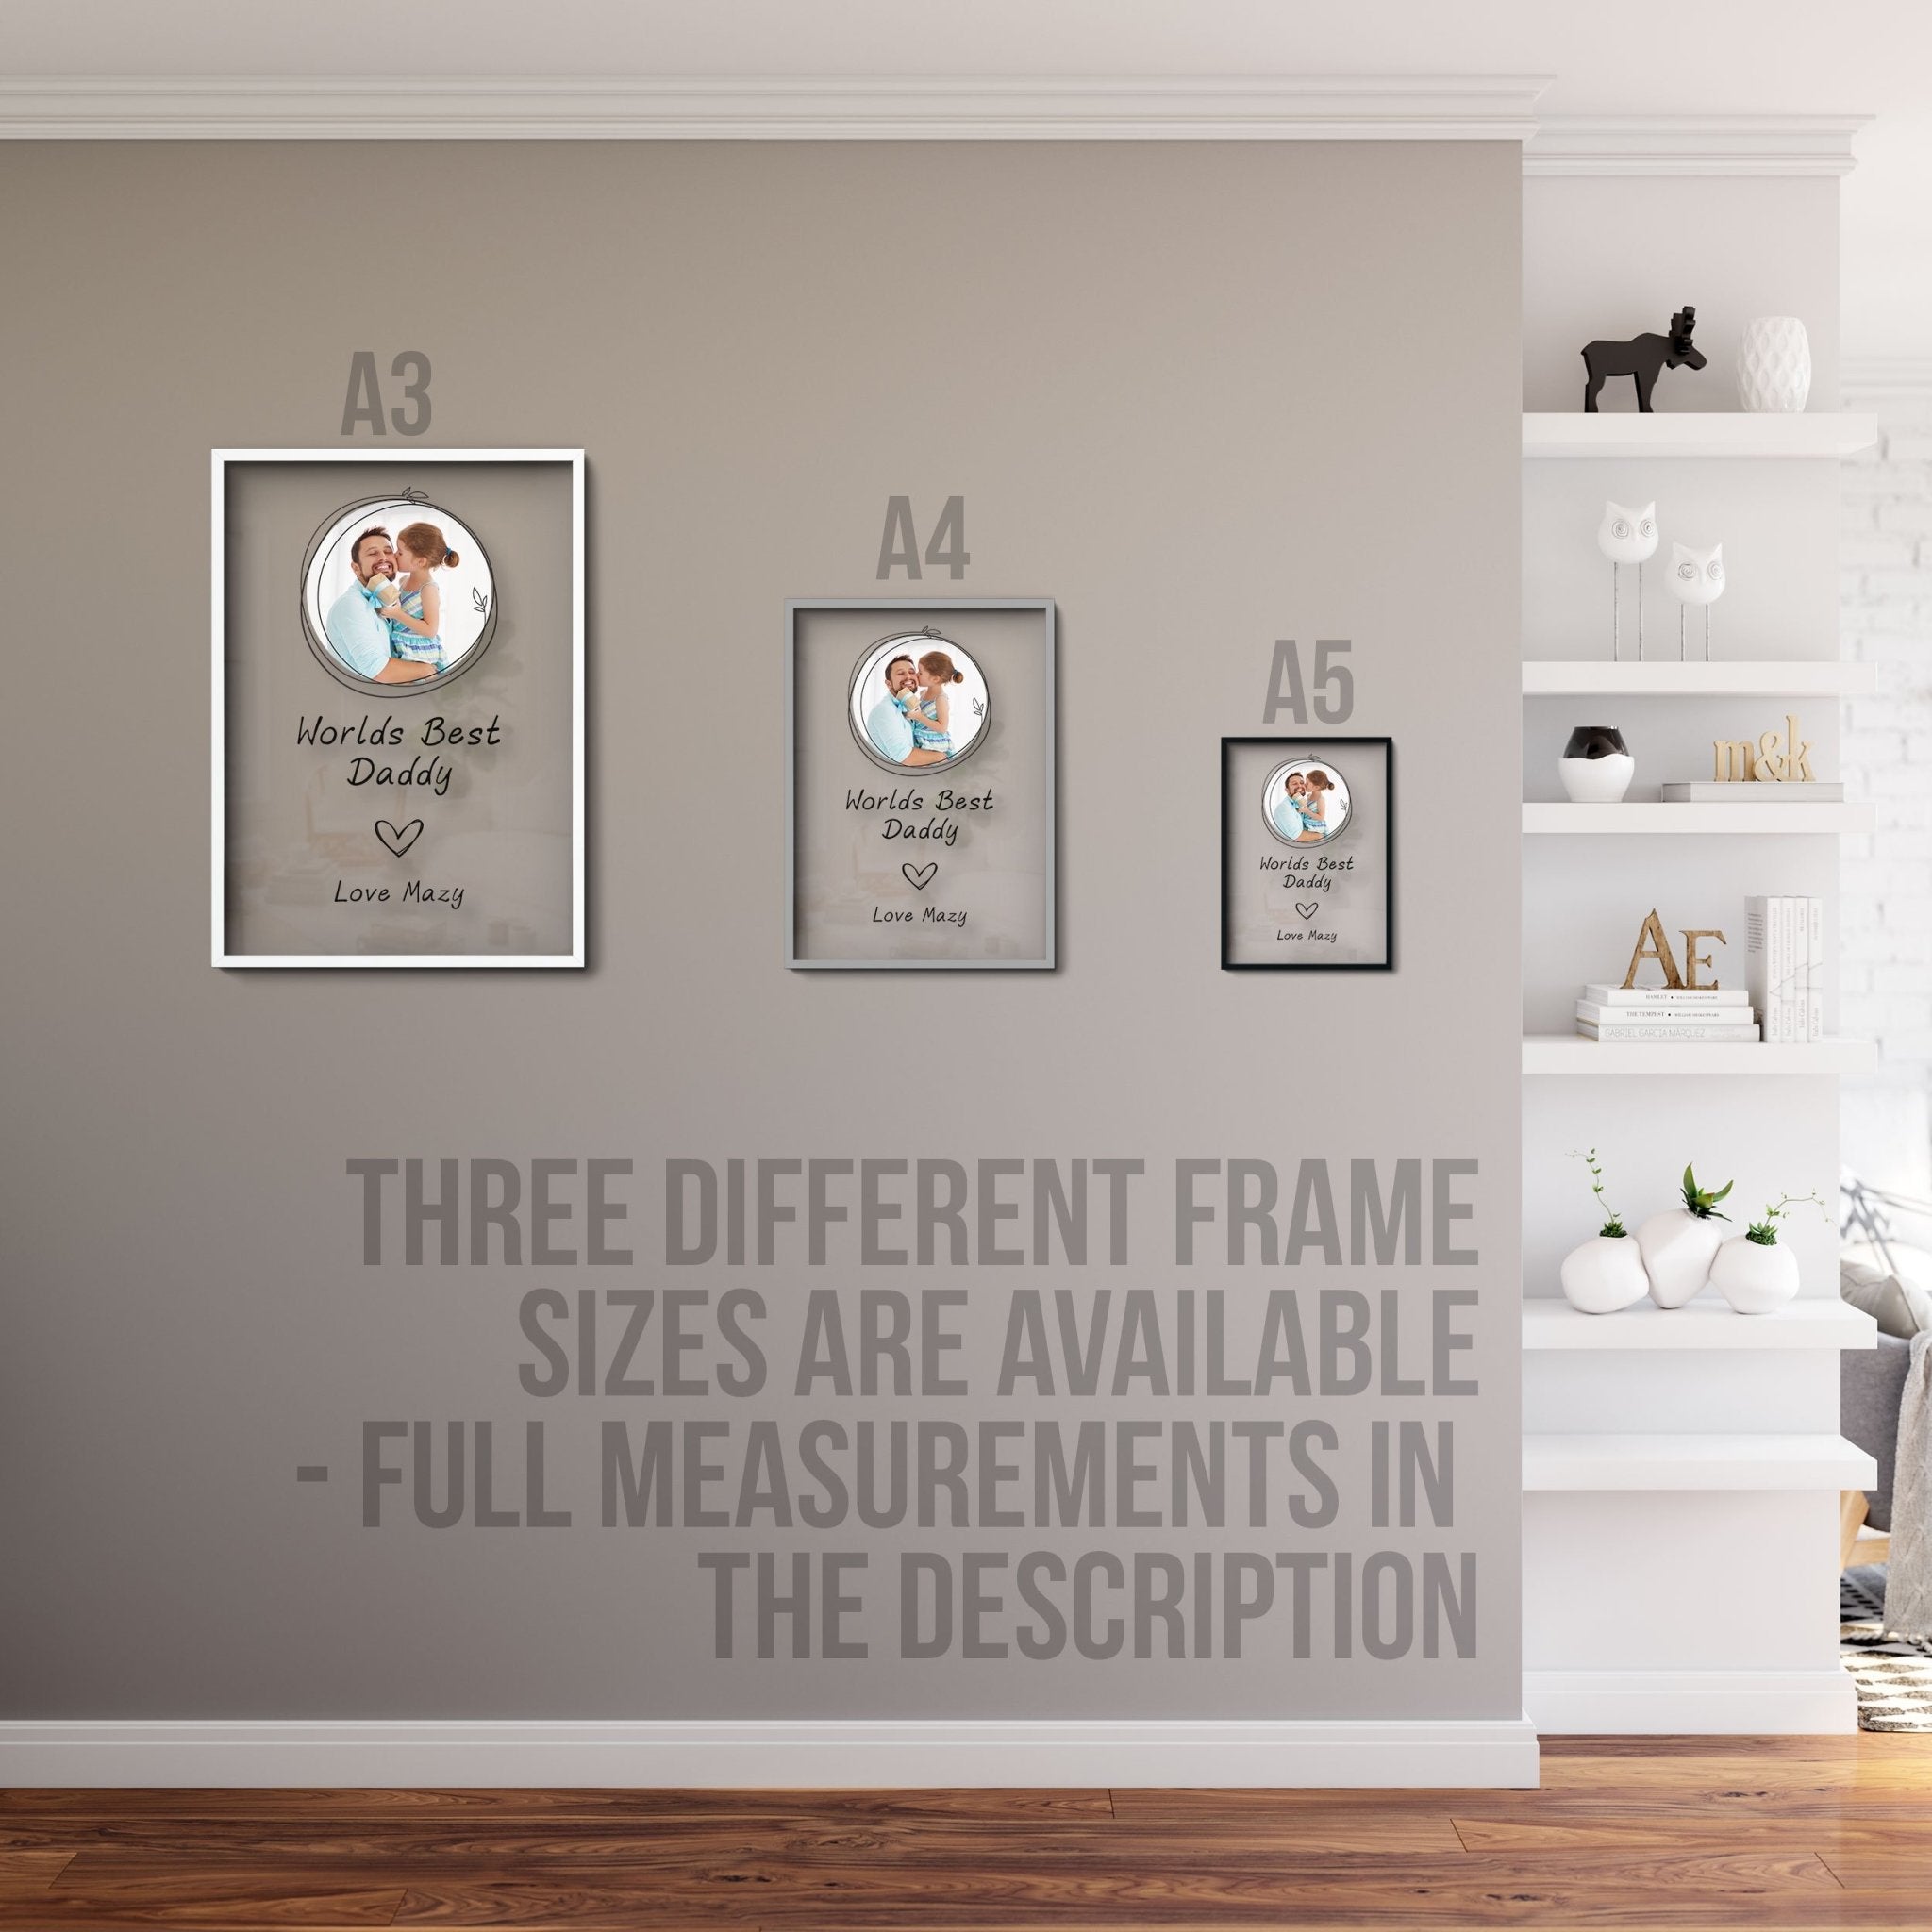 World's Best Daddy | Transparent Photo Frame | First Father's Day